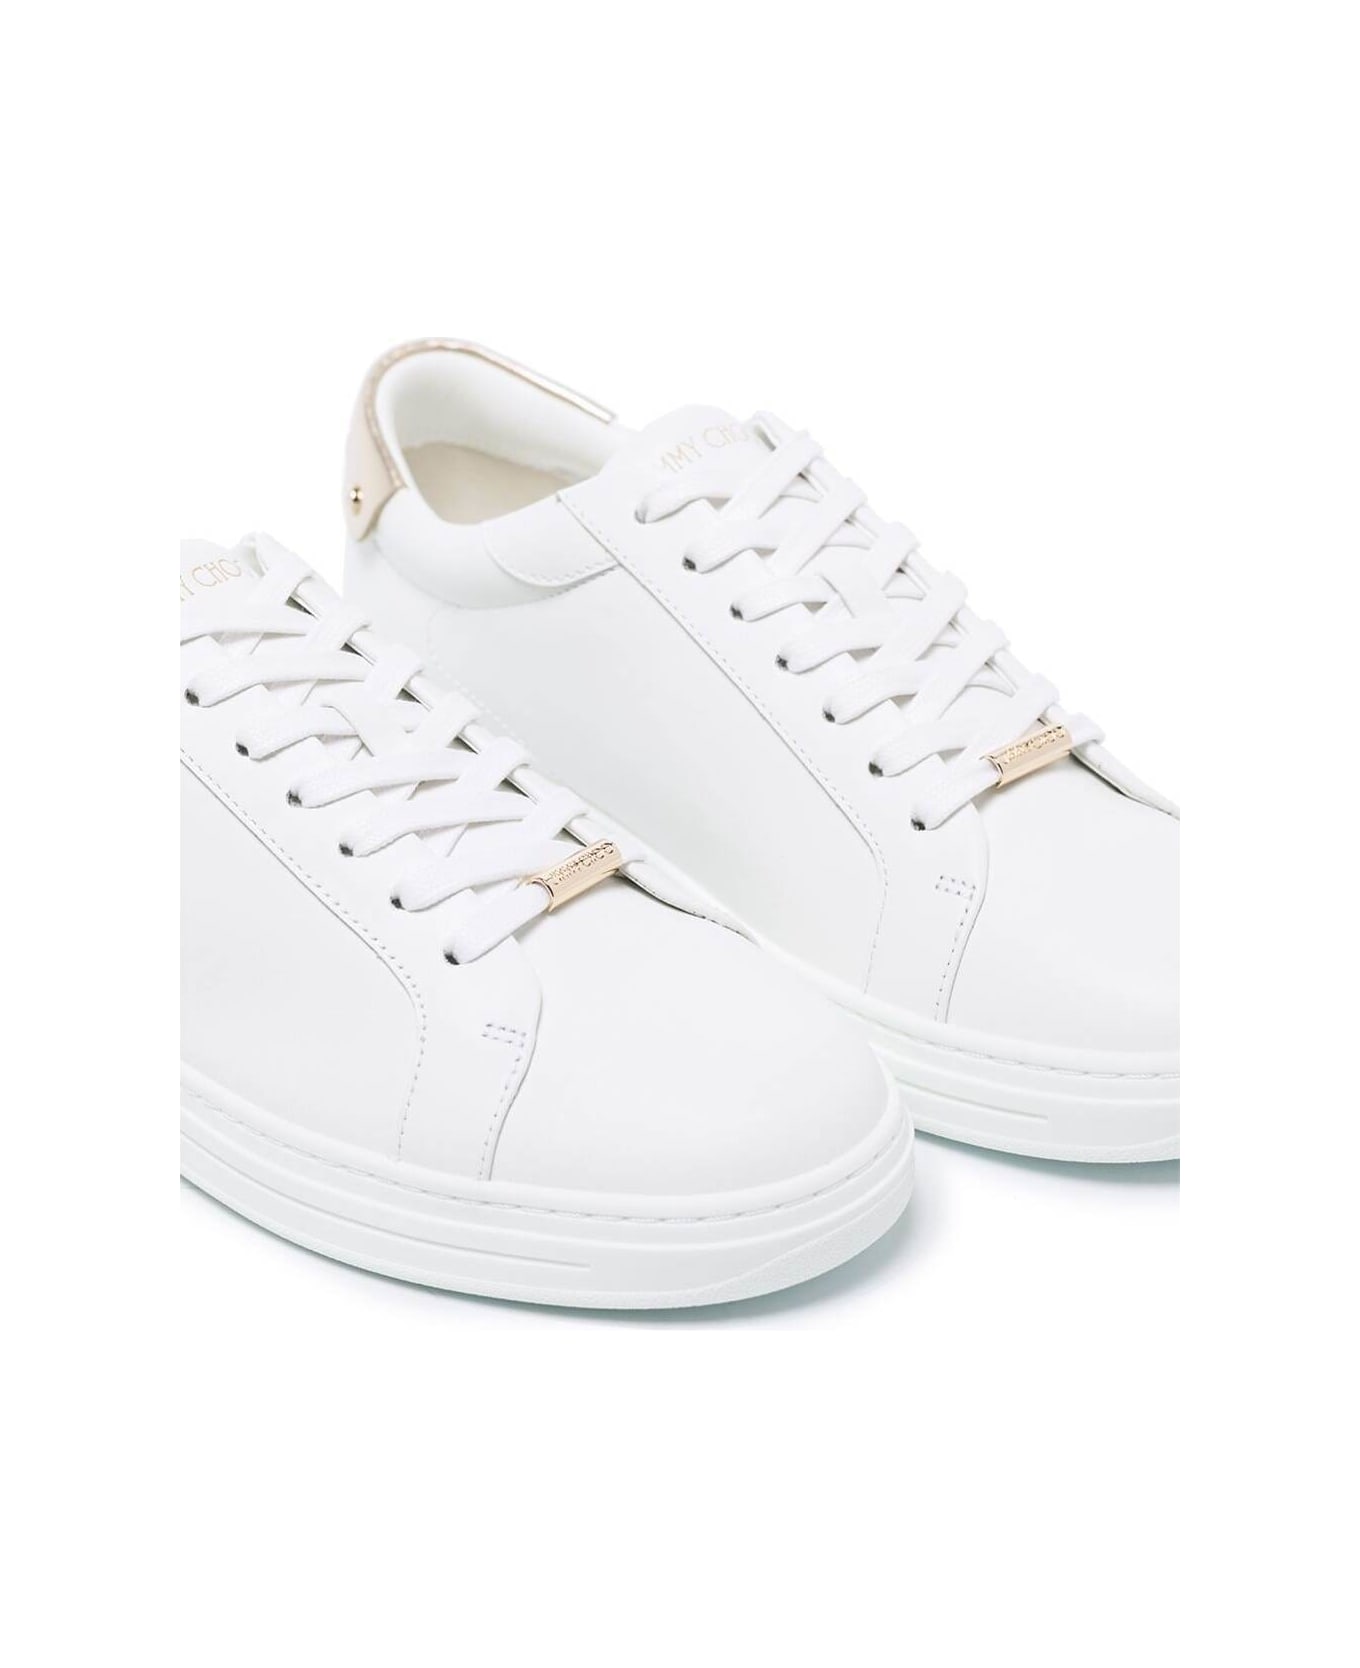 Jimmy Choo Woman's Rome White Leather Sneakers - White スニーカー